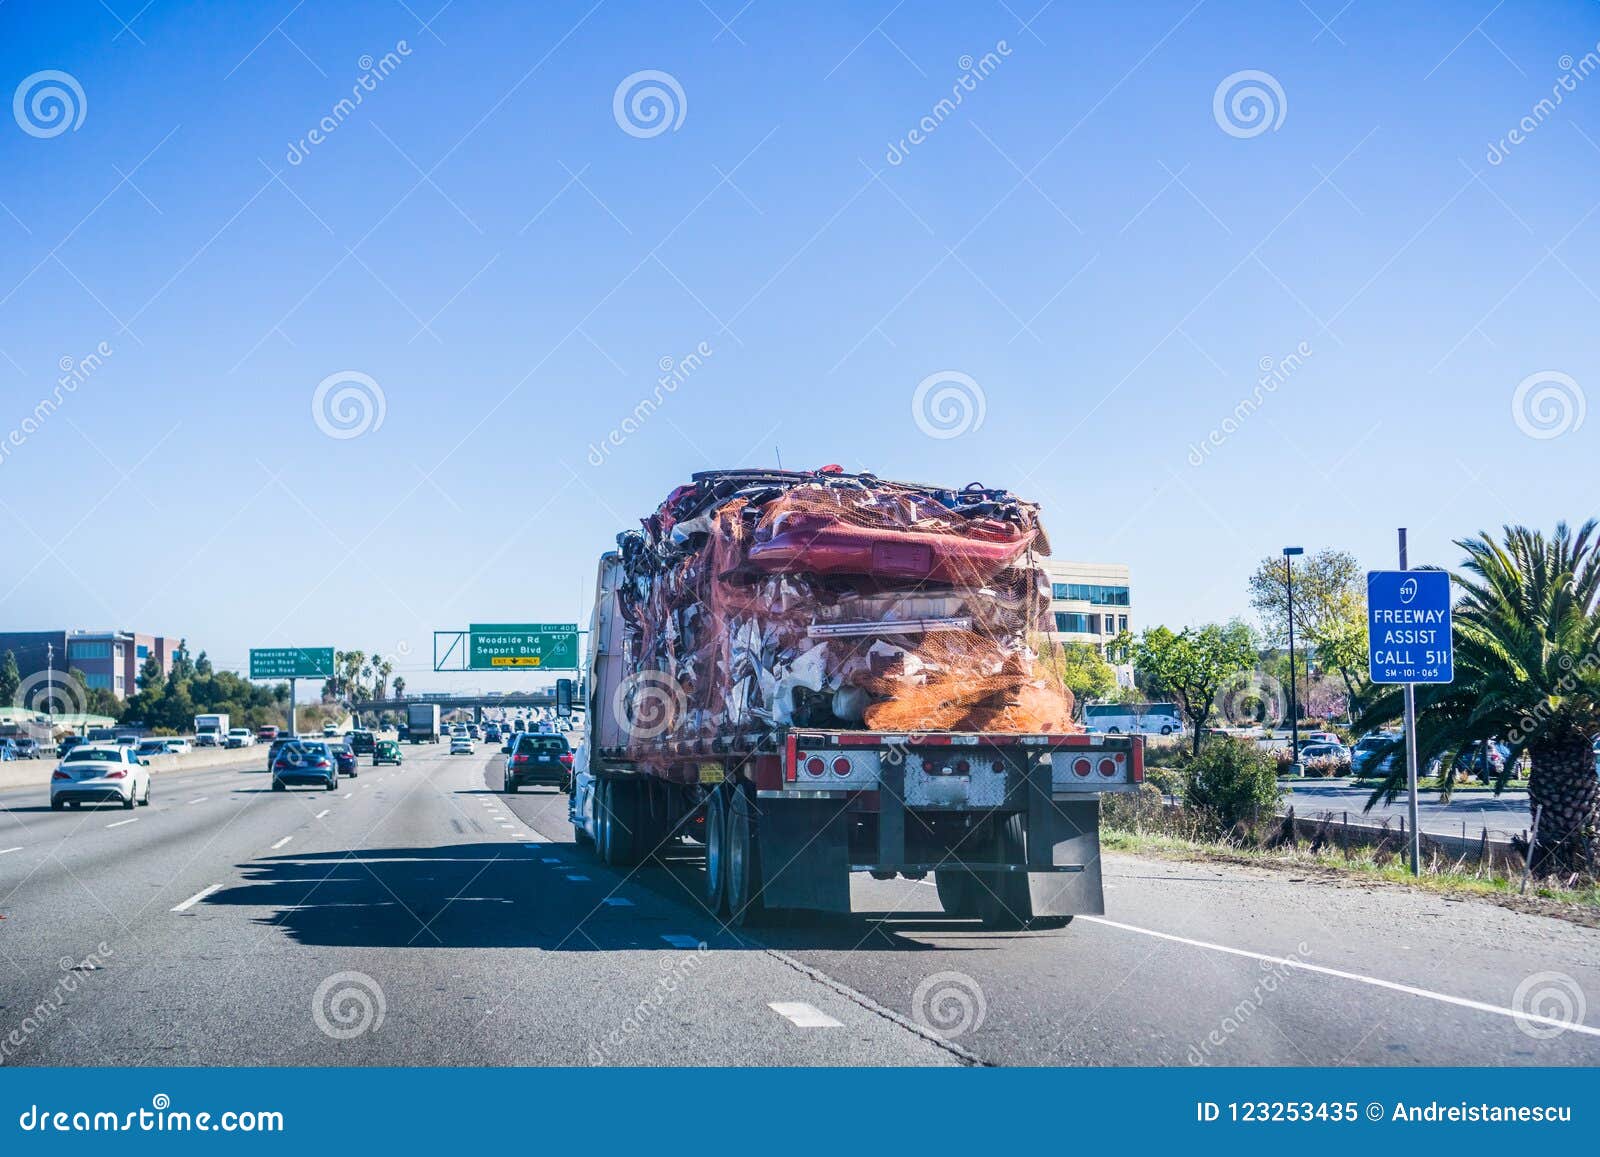 truck carrying crushed car bodies